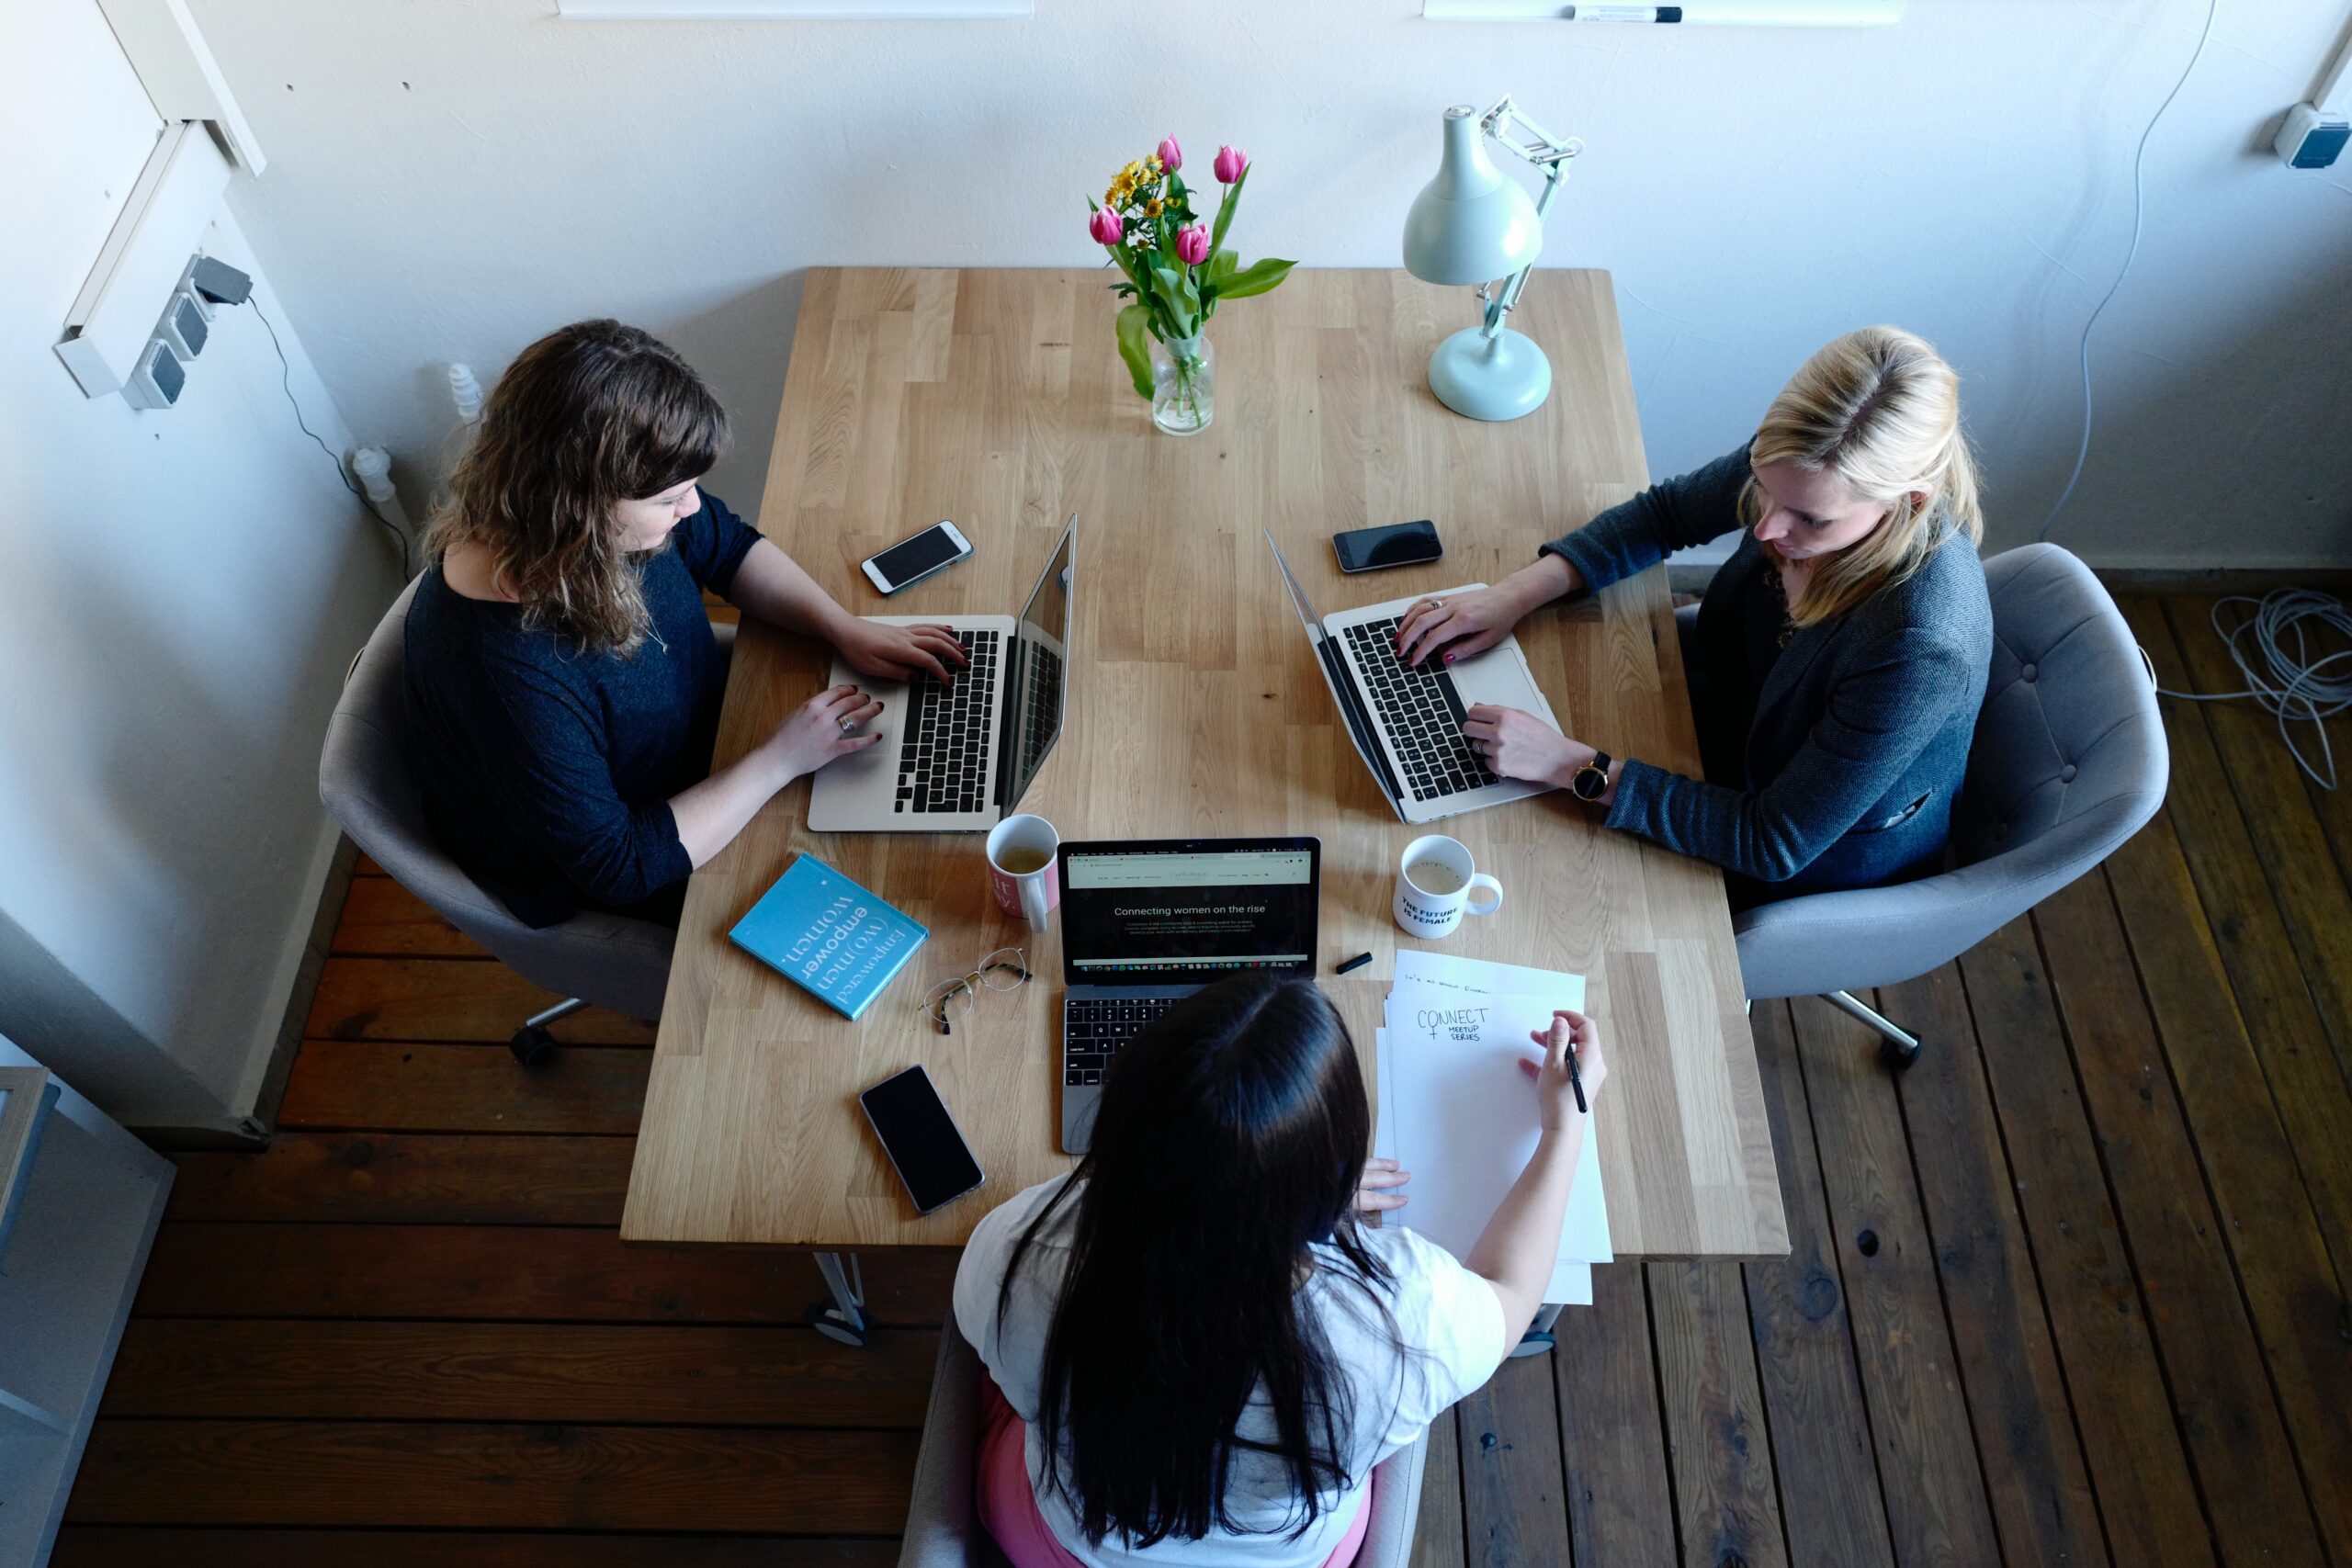 Three women working on laptops at a wooden table while discussing group health insurance options.